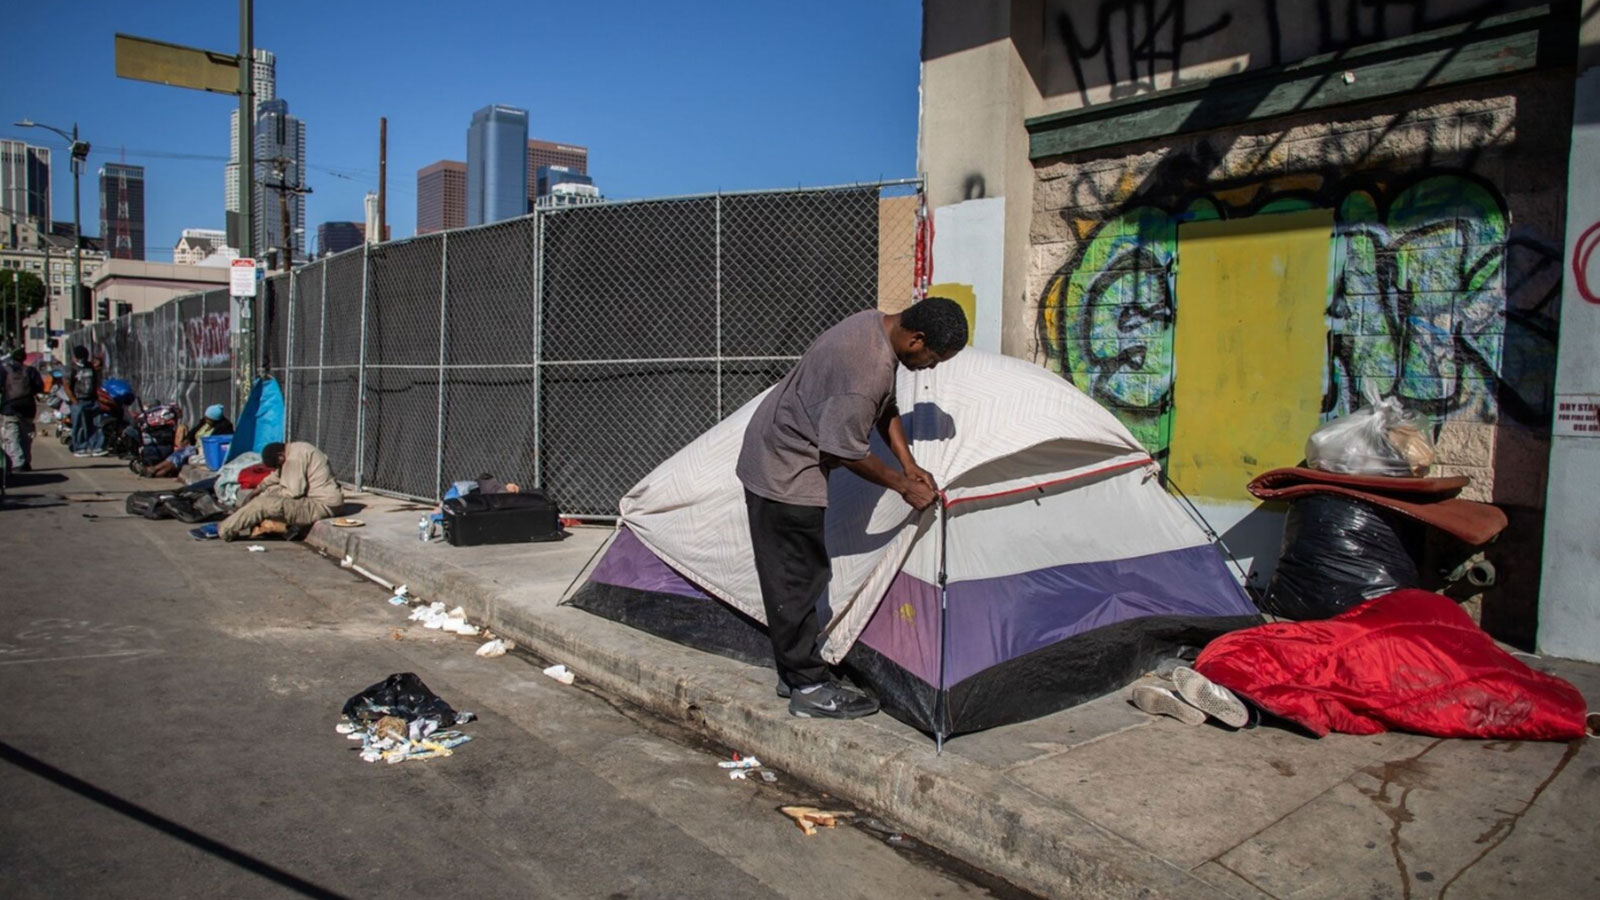 A homeless man zips up his tent in front of the nonprofit Midnight Mission's headquarters in the Skid Row neighborhood of downtown Los Angeles in 2021.